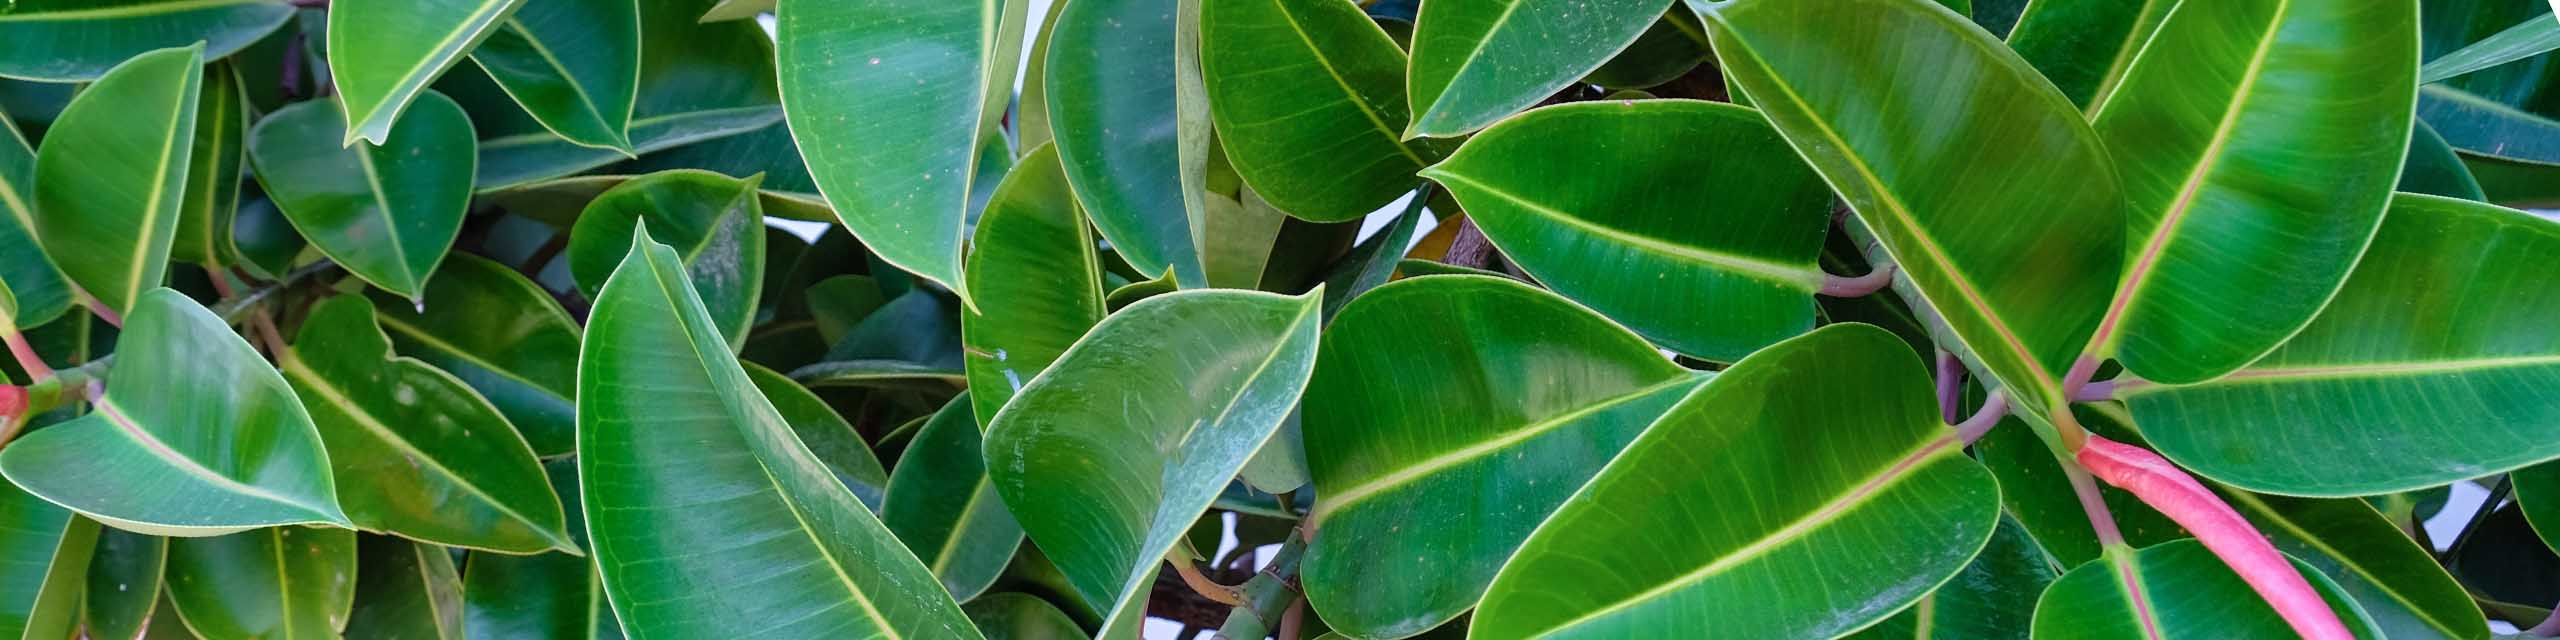 Top down view of green ficus plant leaves.